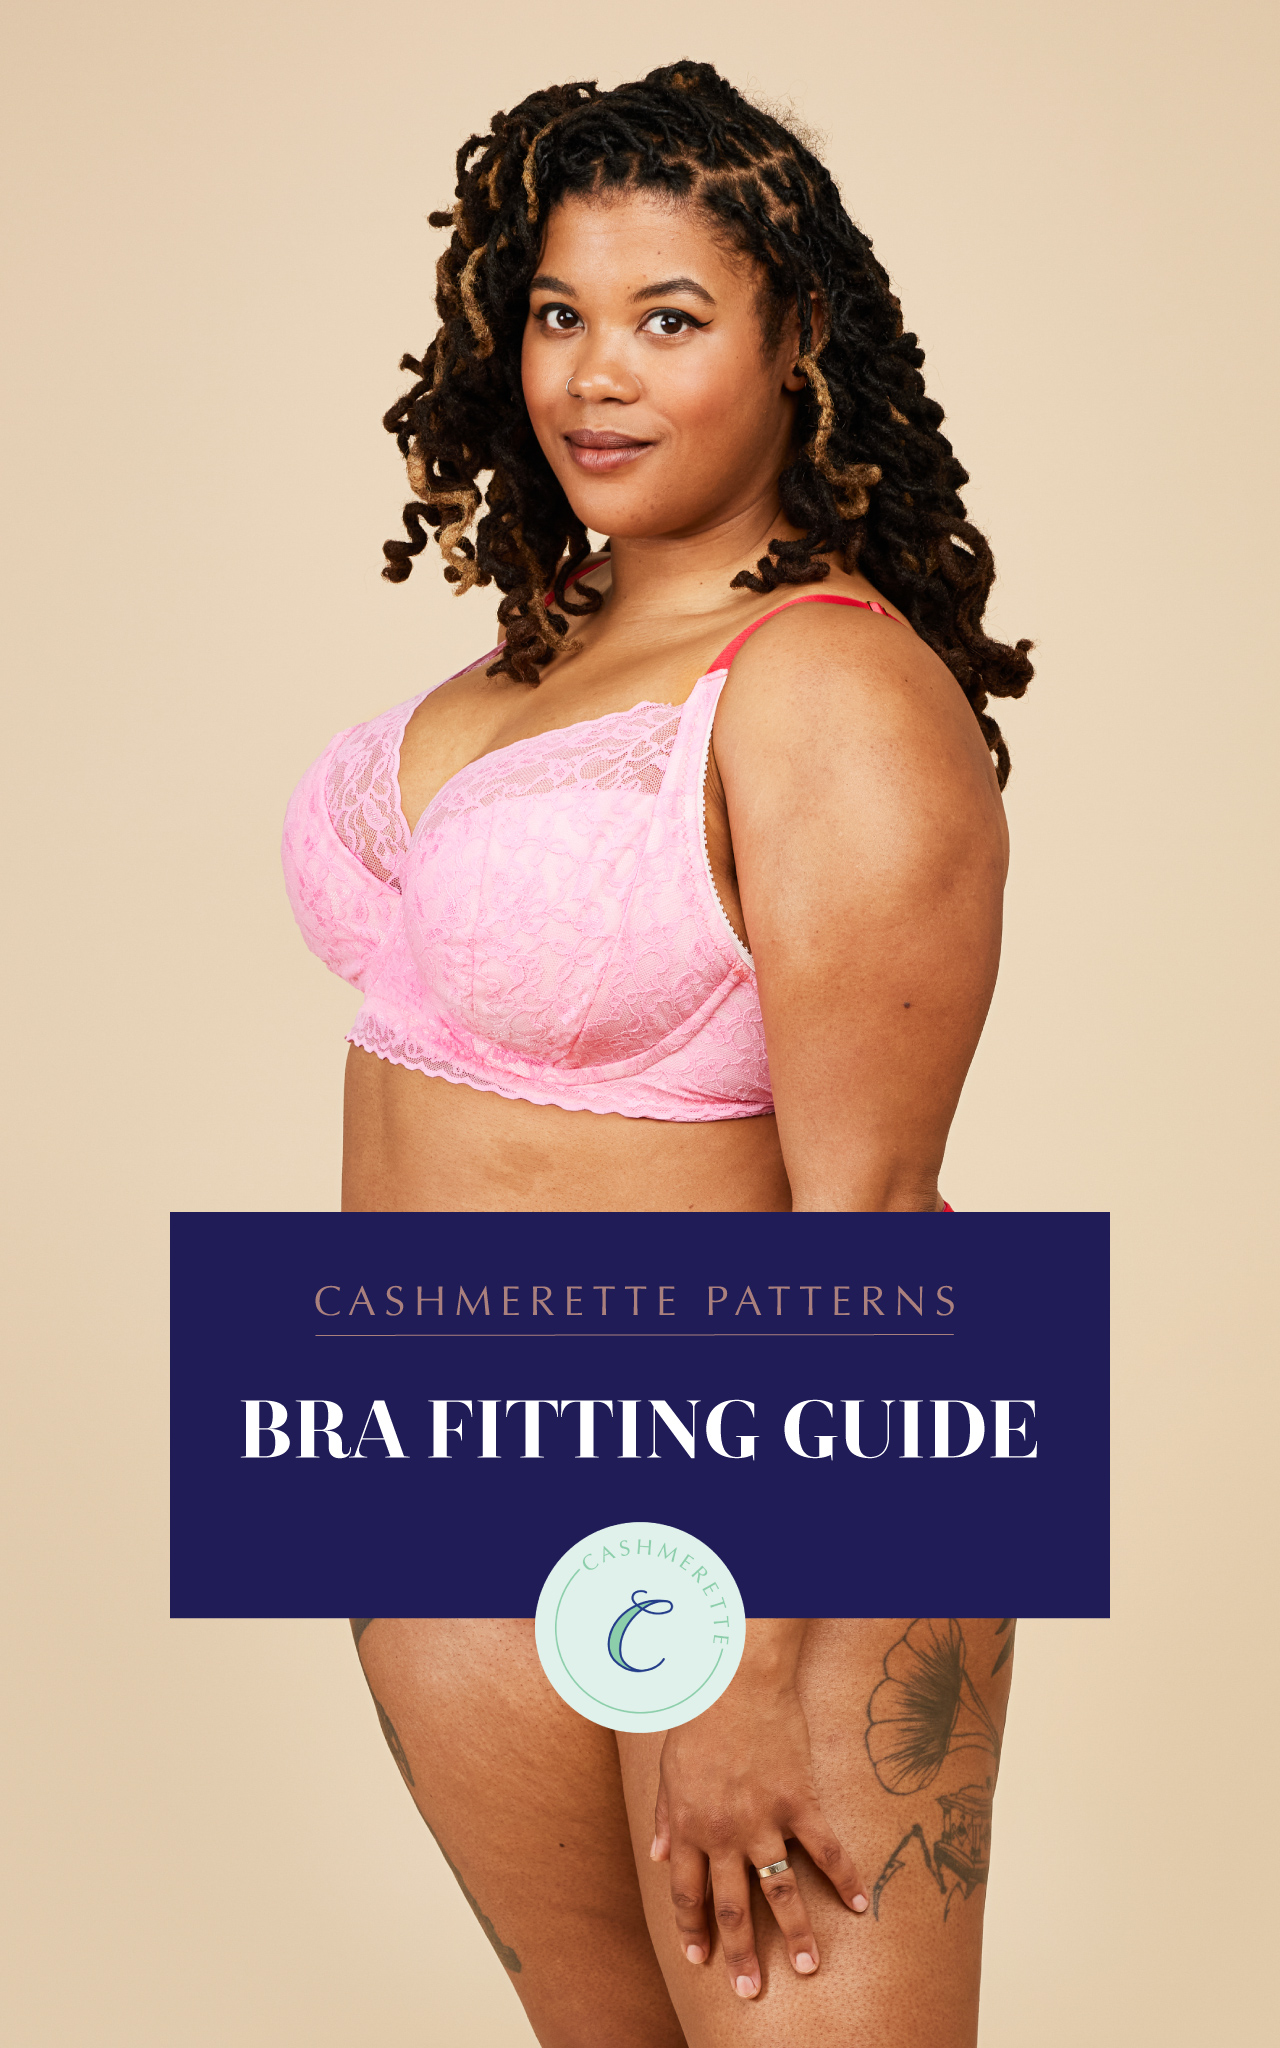 How to sew a bra that fits: A bra fitting guide for large busts